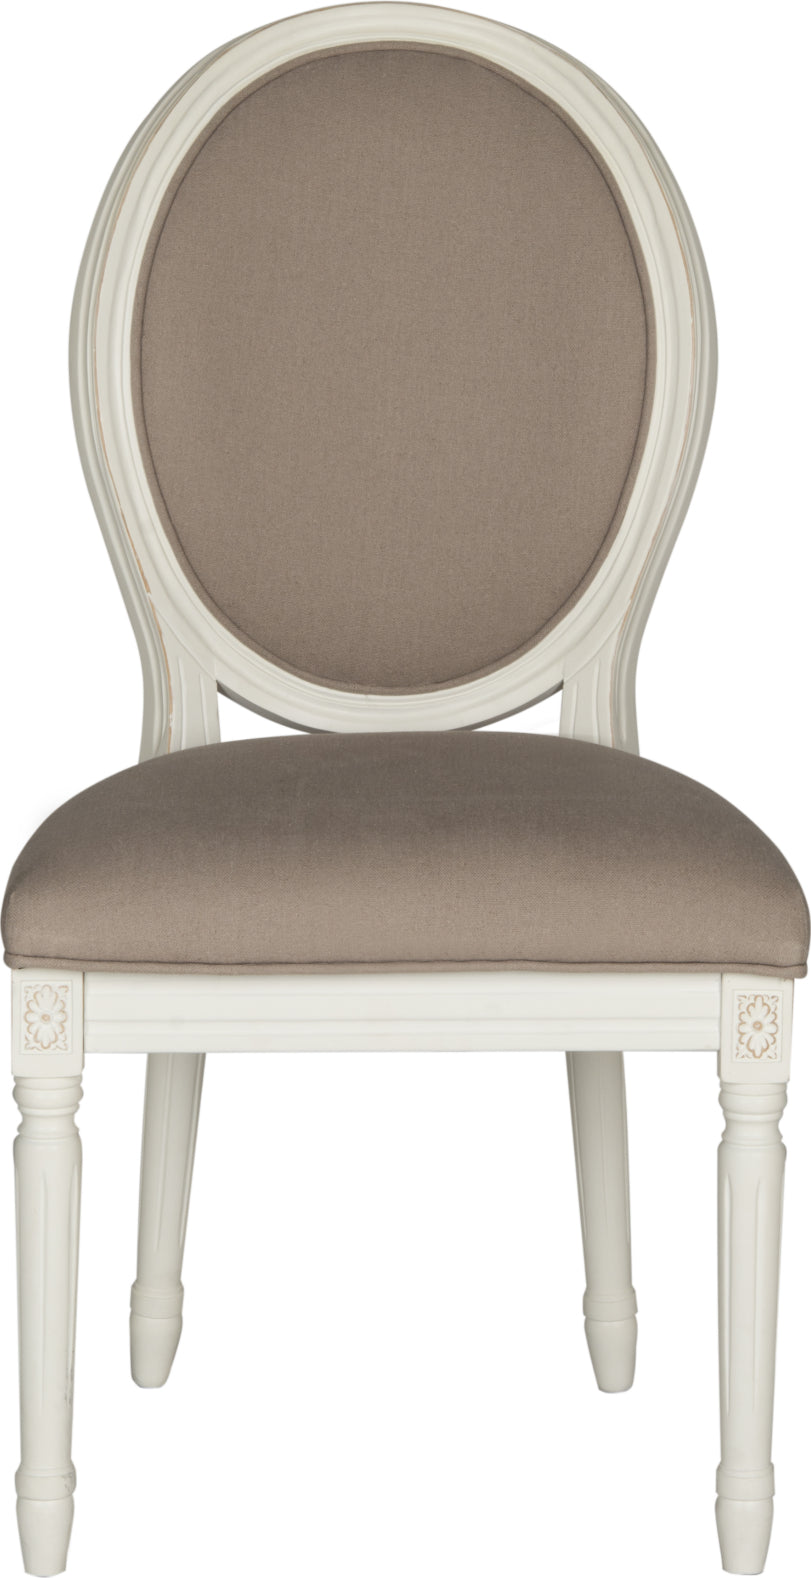 Safavieh Holloway 19''H French Brasserie Linen Oval Side Chair Taupe and Cream Furniture main image